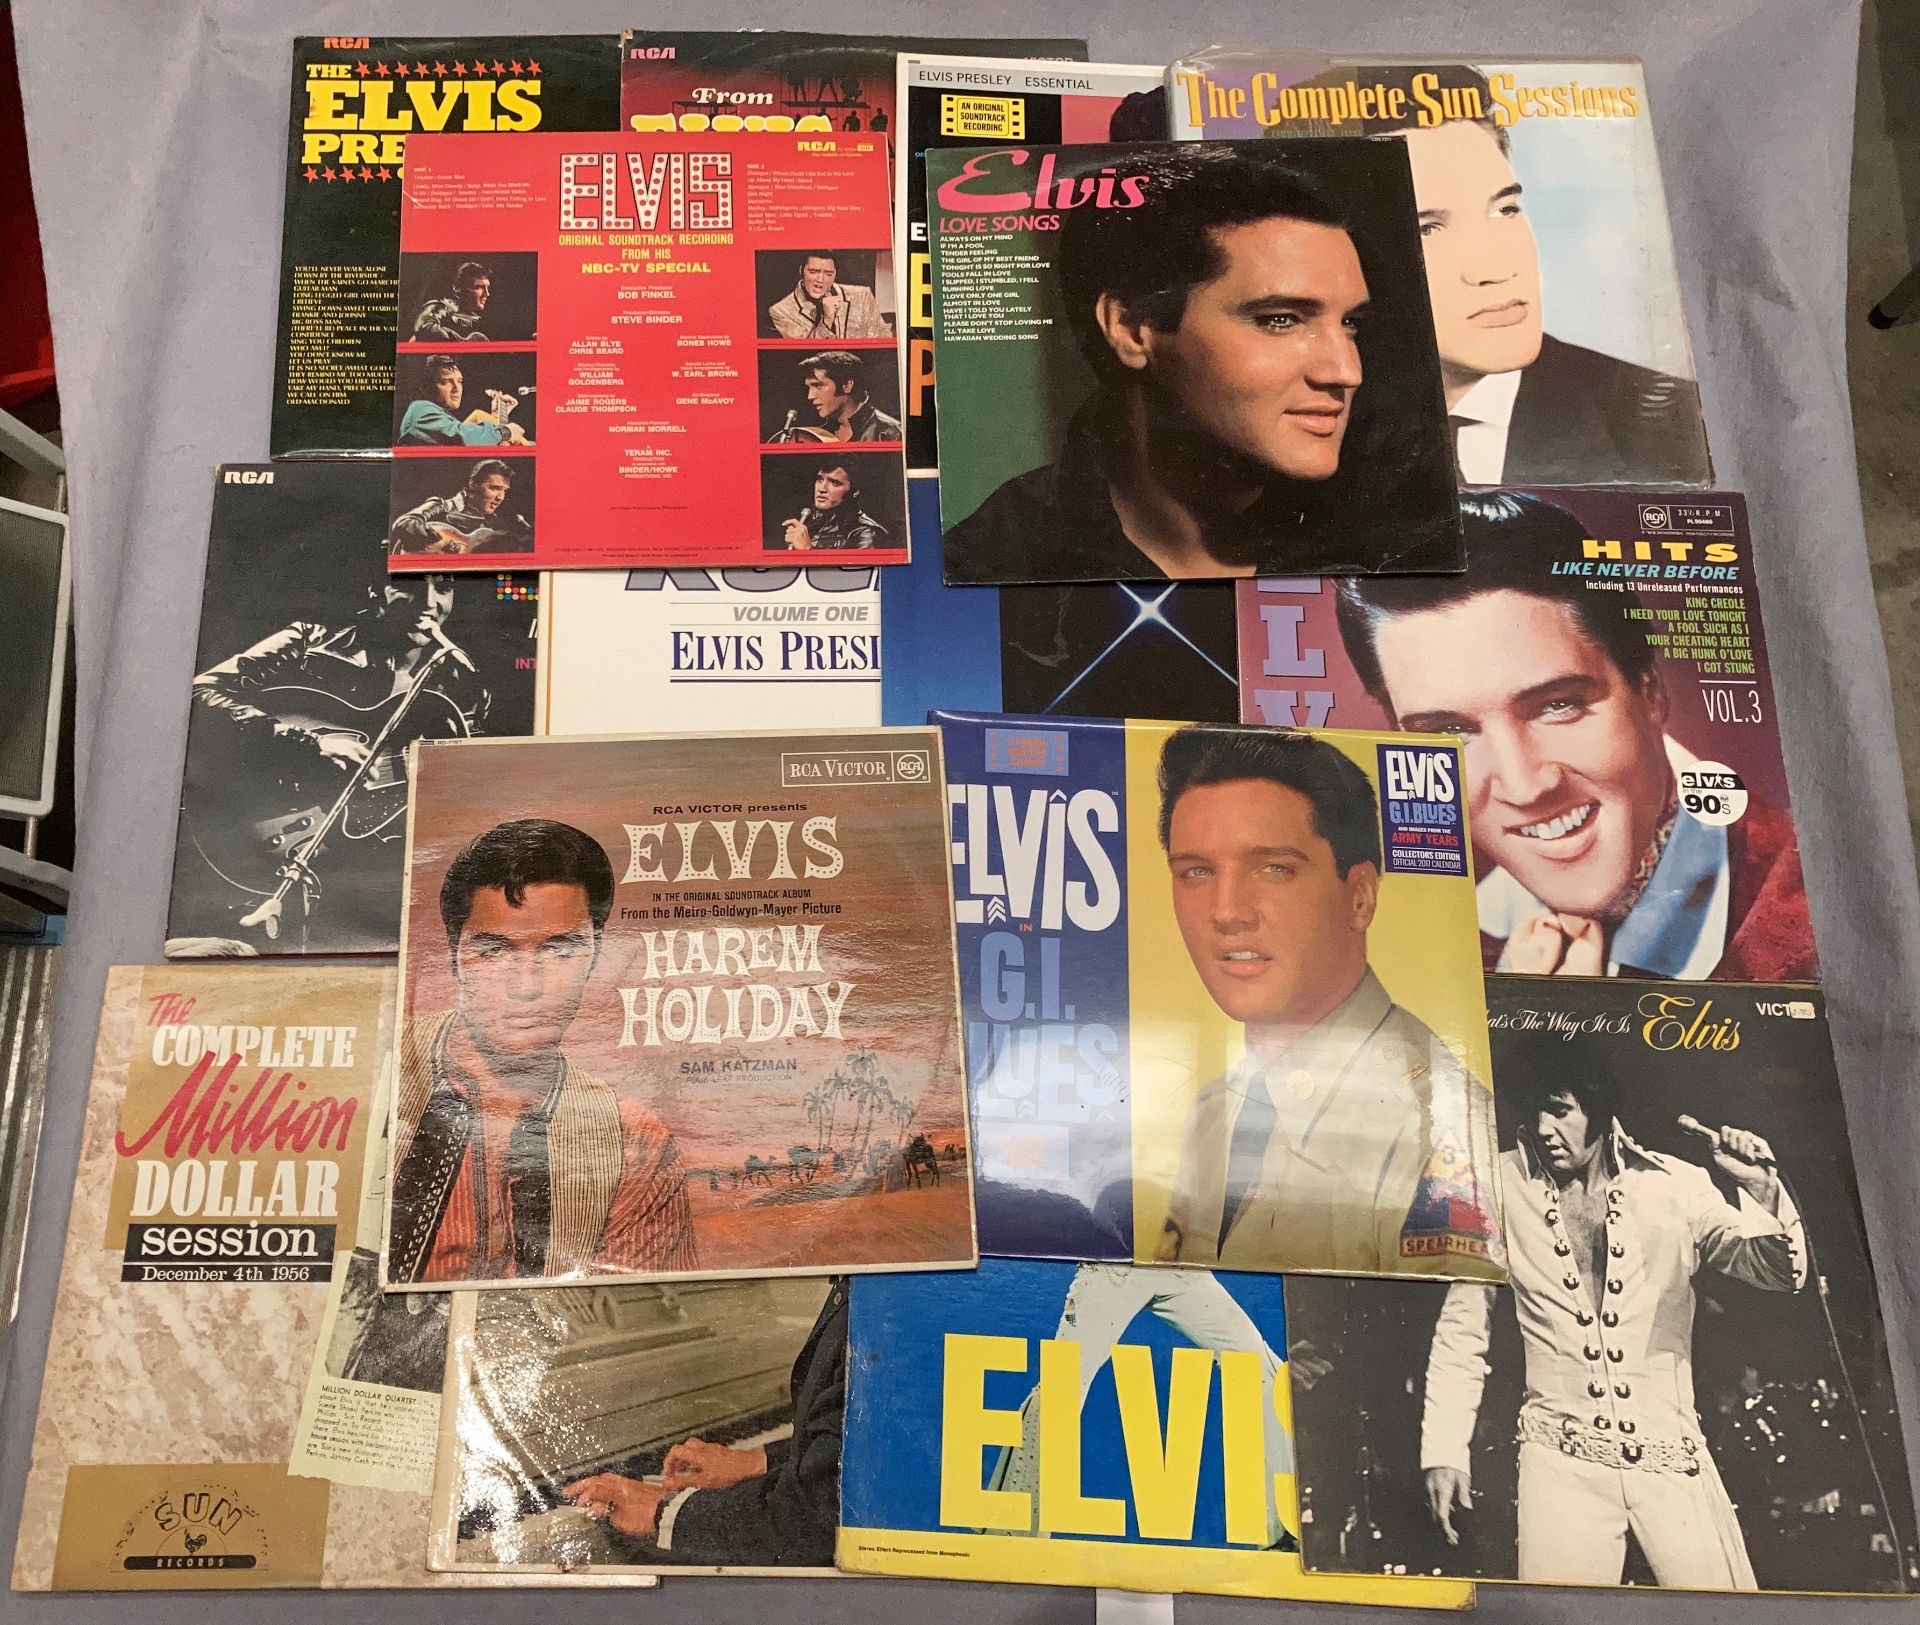 16 assorted 12" LPs/albums by Elvis Presley, G.